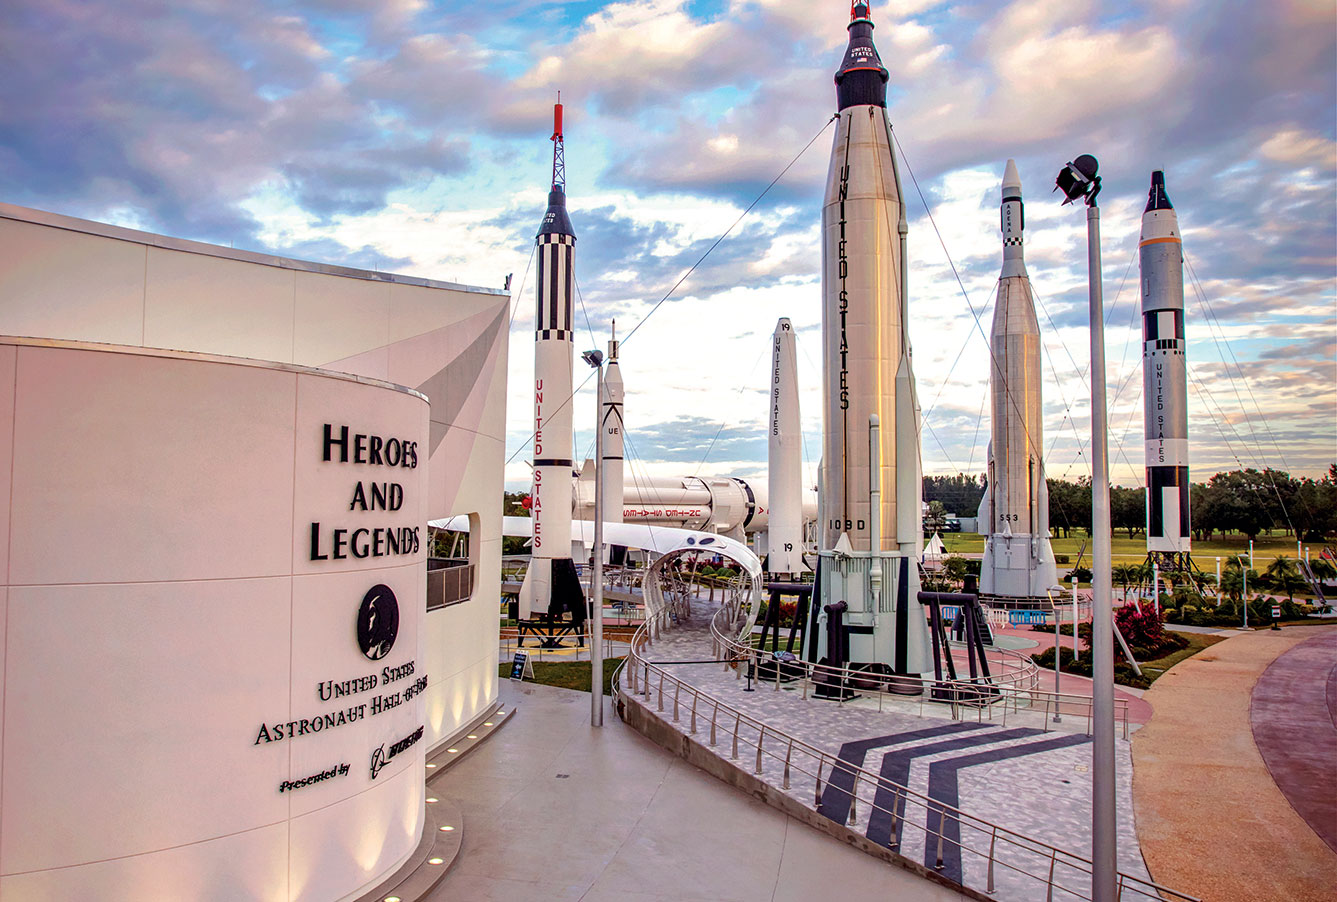 Heroes and Legends presented by Boeing, with the Rocket Garden in the background.